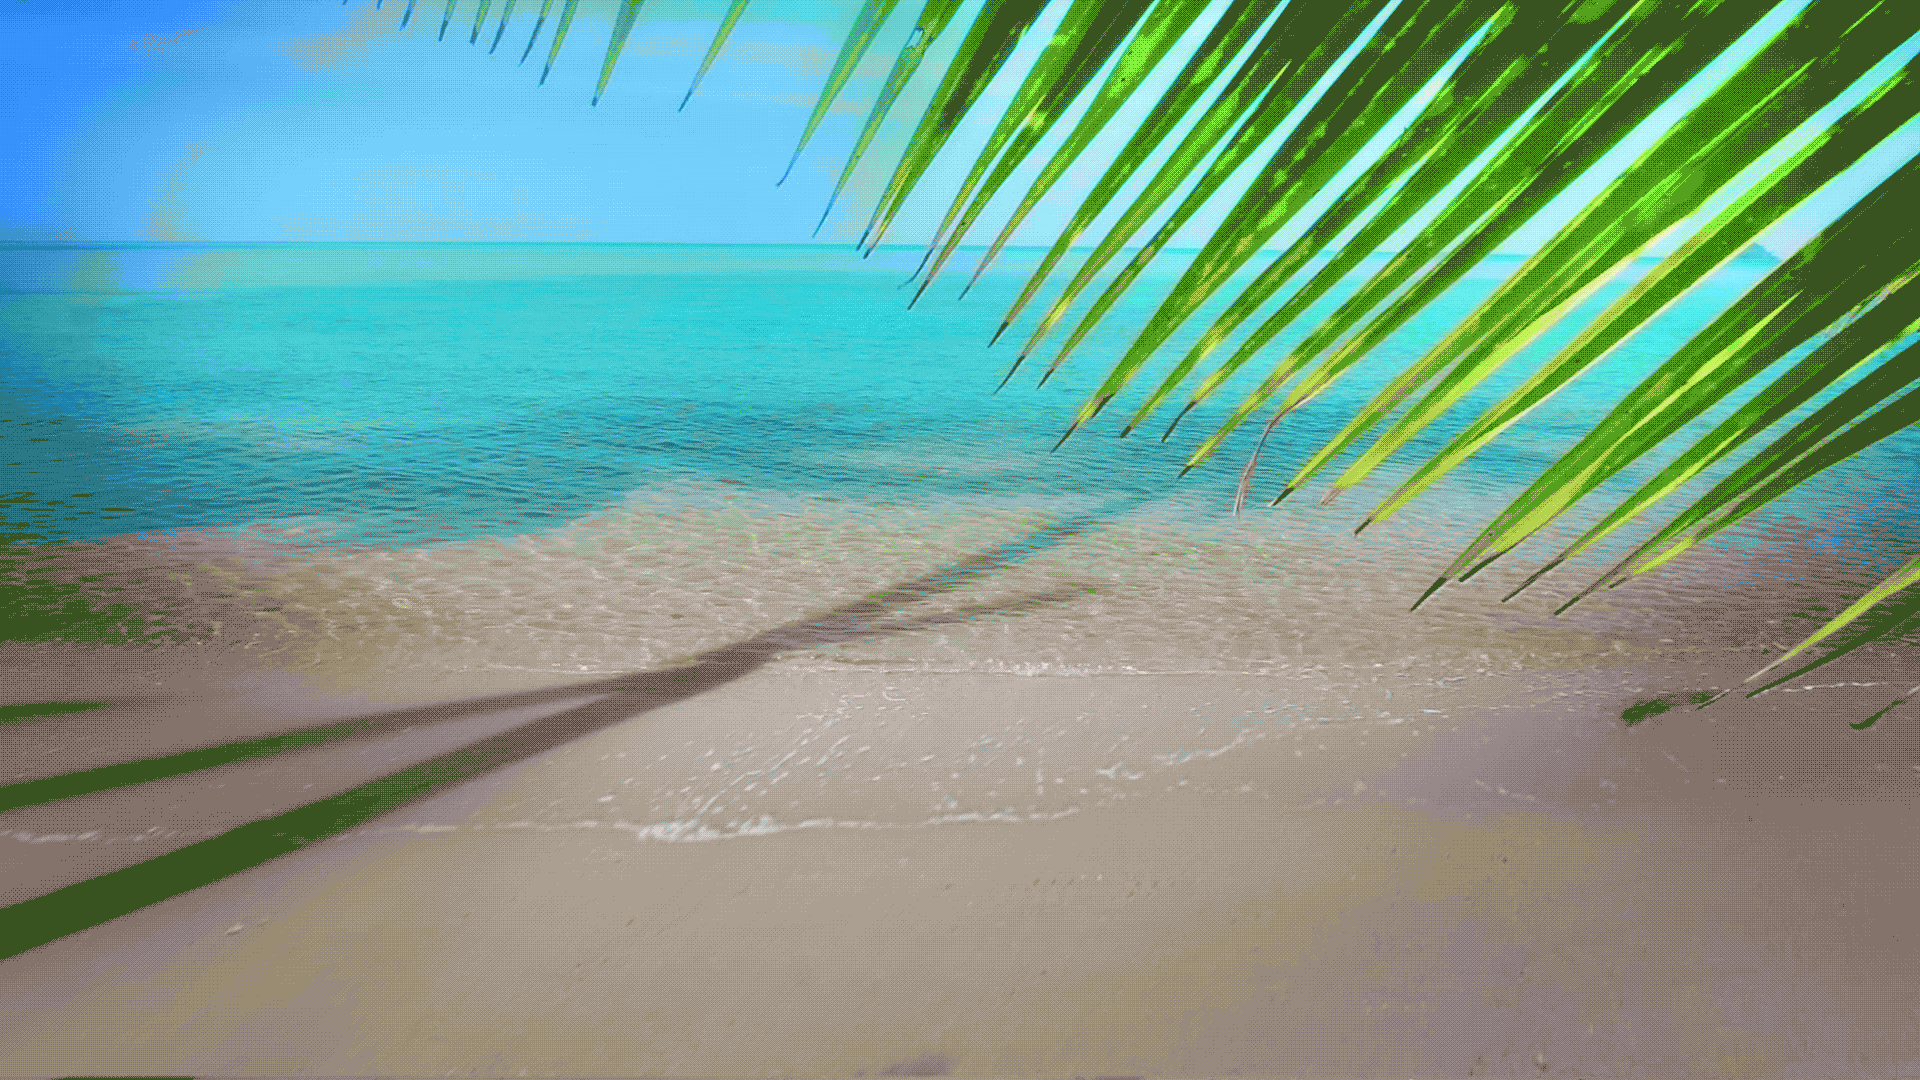 animated video of the ocean waves and palm trees moving